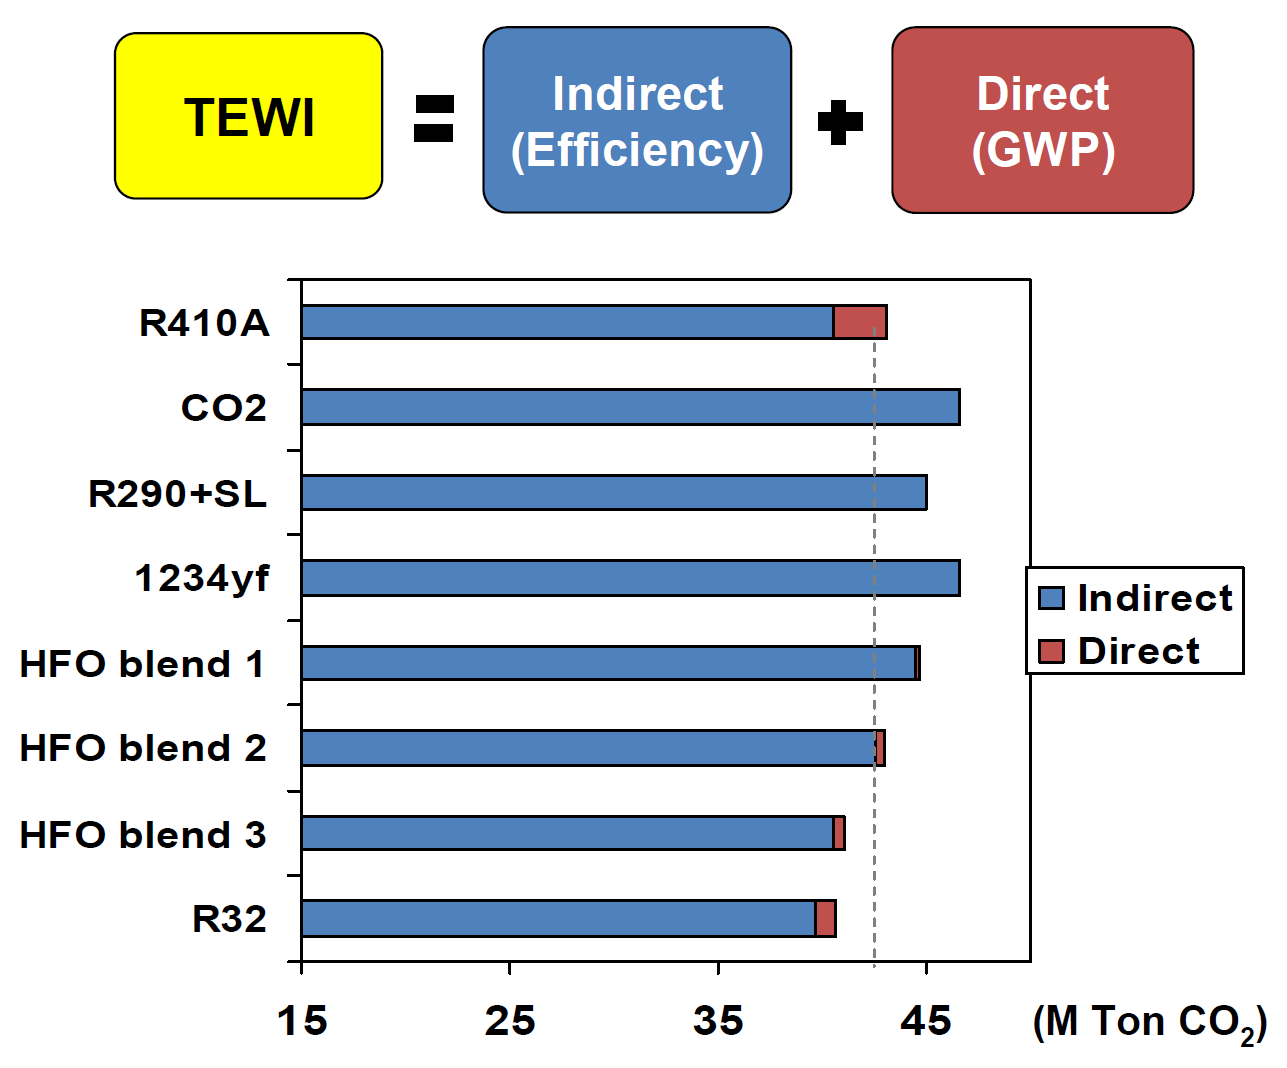 Total Environmental Warming Impact (TEWI) measures the total warming effect of a refrigerant, both indirect (energy consumption) and direct (refrigerant leakage). The TEWI metric indicates that efficiency is the most important parameter for evaluating refrigerants in low-leakage systems. Source: ACEEE Summer Study on Energy Efficiency in Buildings (2010). (Click image to enlarge.)